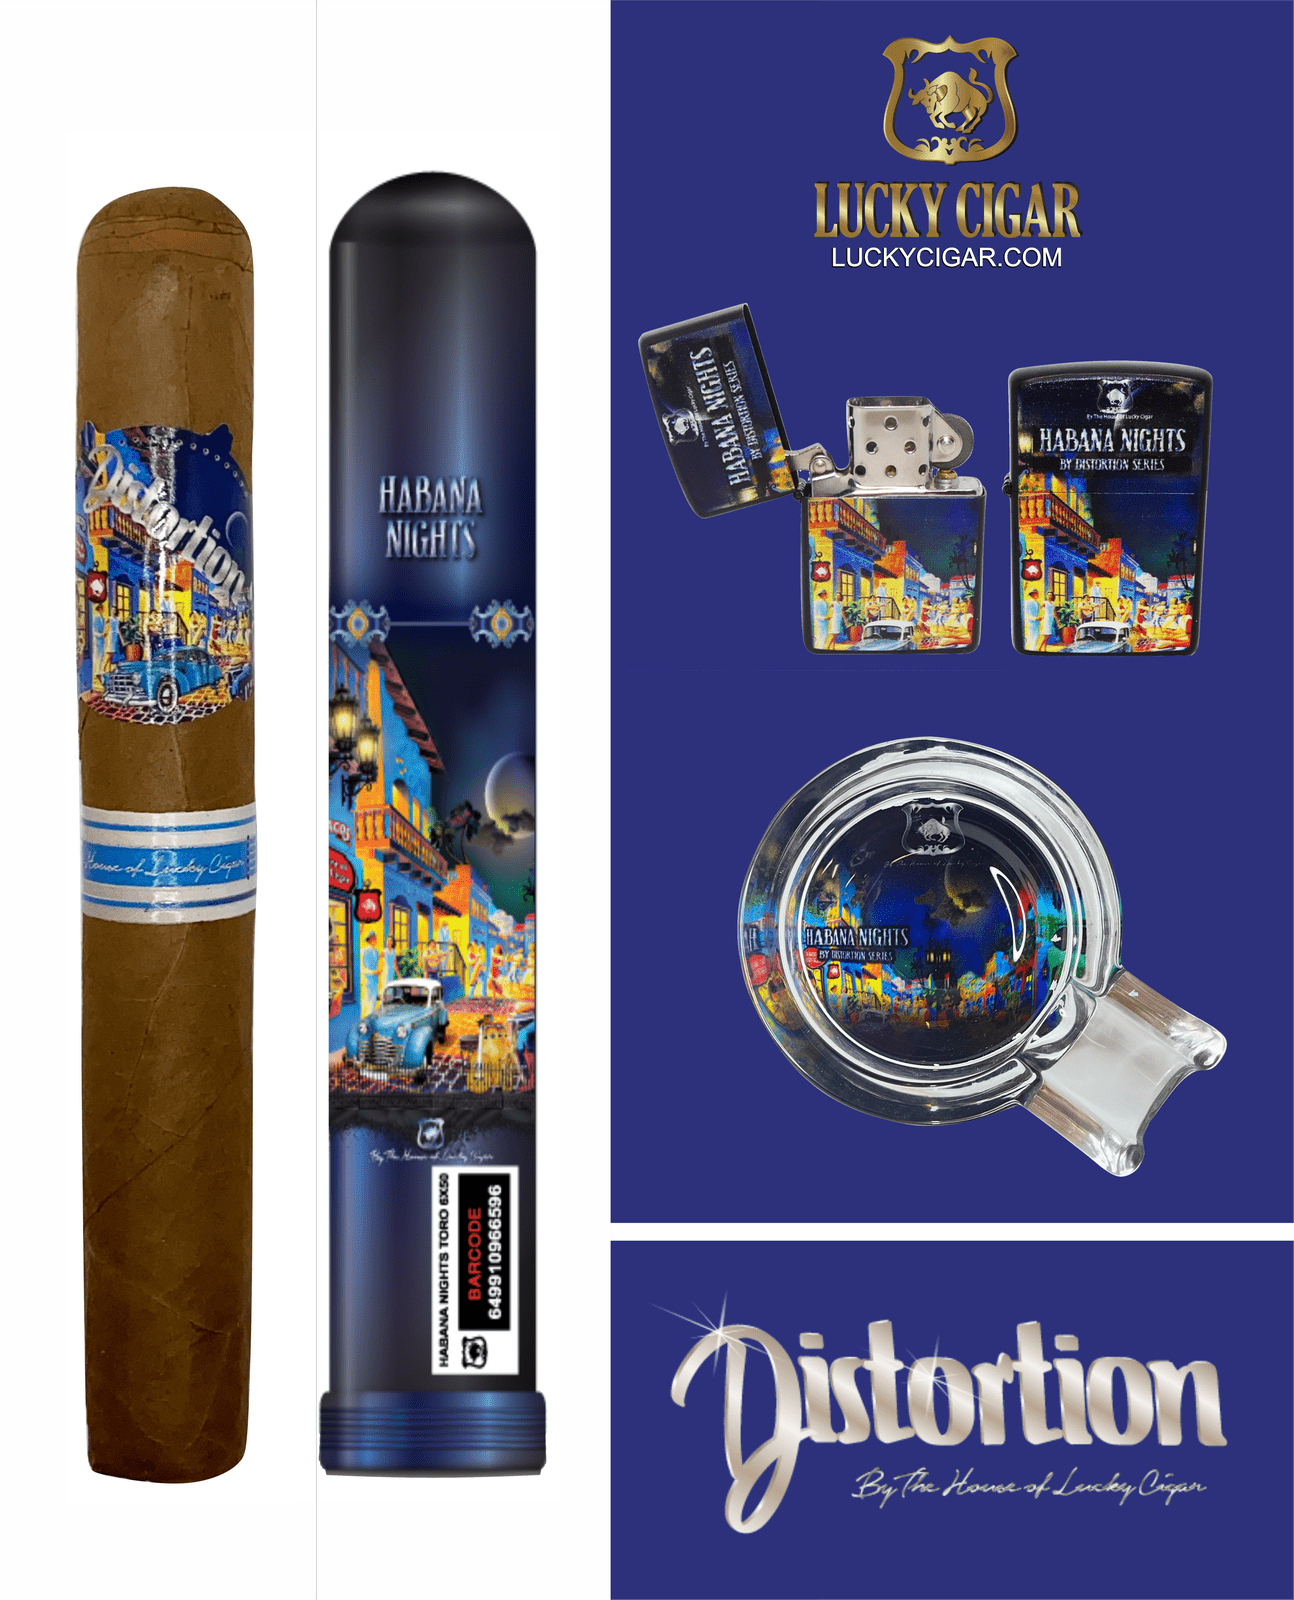 What A Set 😉 Comes  With  Habana  Nights  Crystal  Ashtray & Habana Nights  Lighter & Habana Night Connecticut En Tubo 6x50